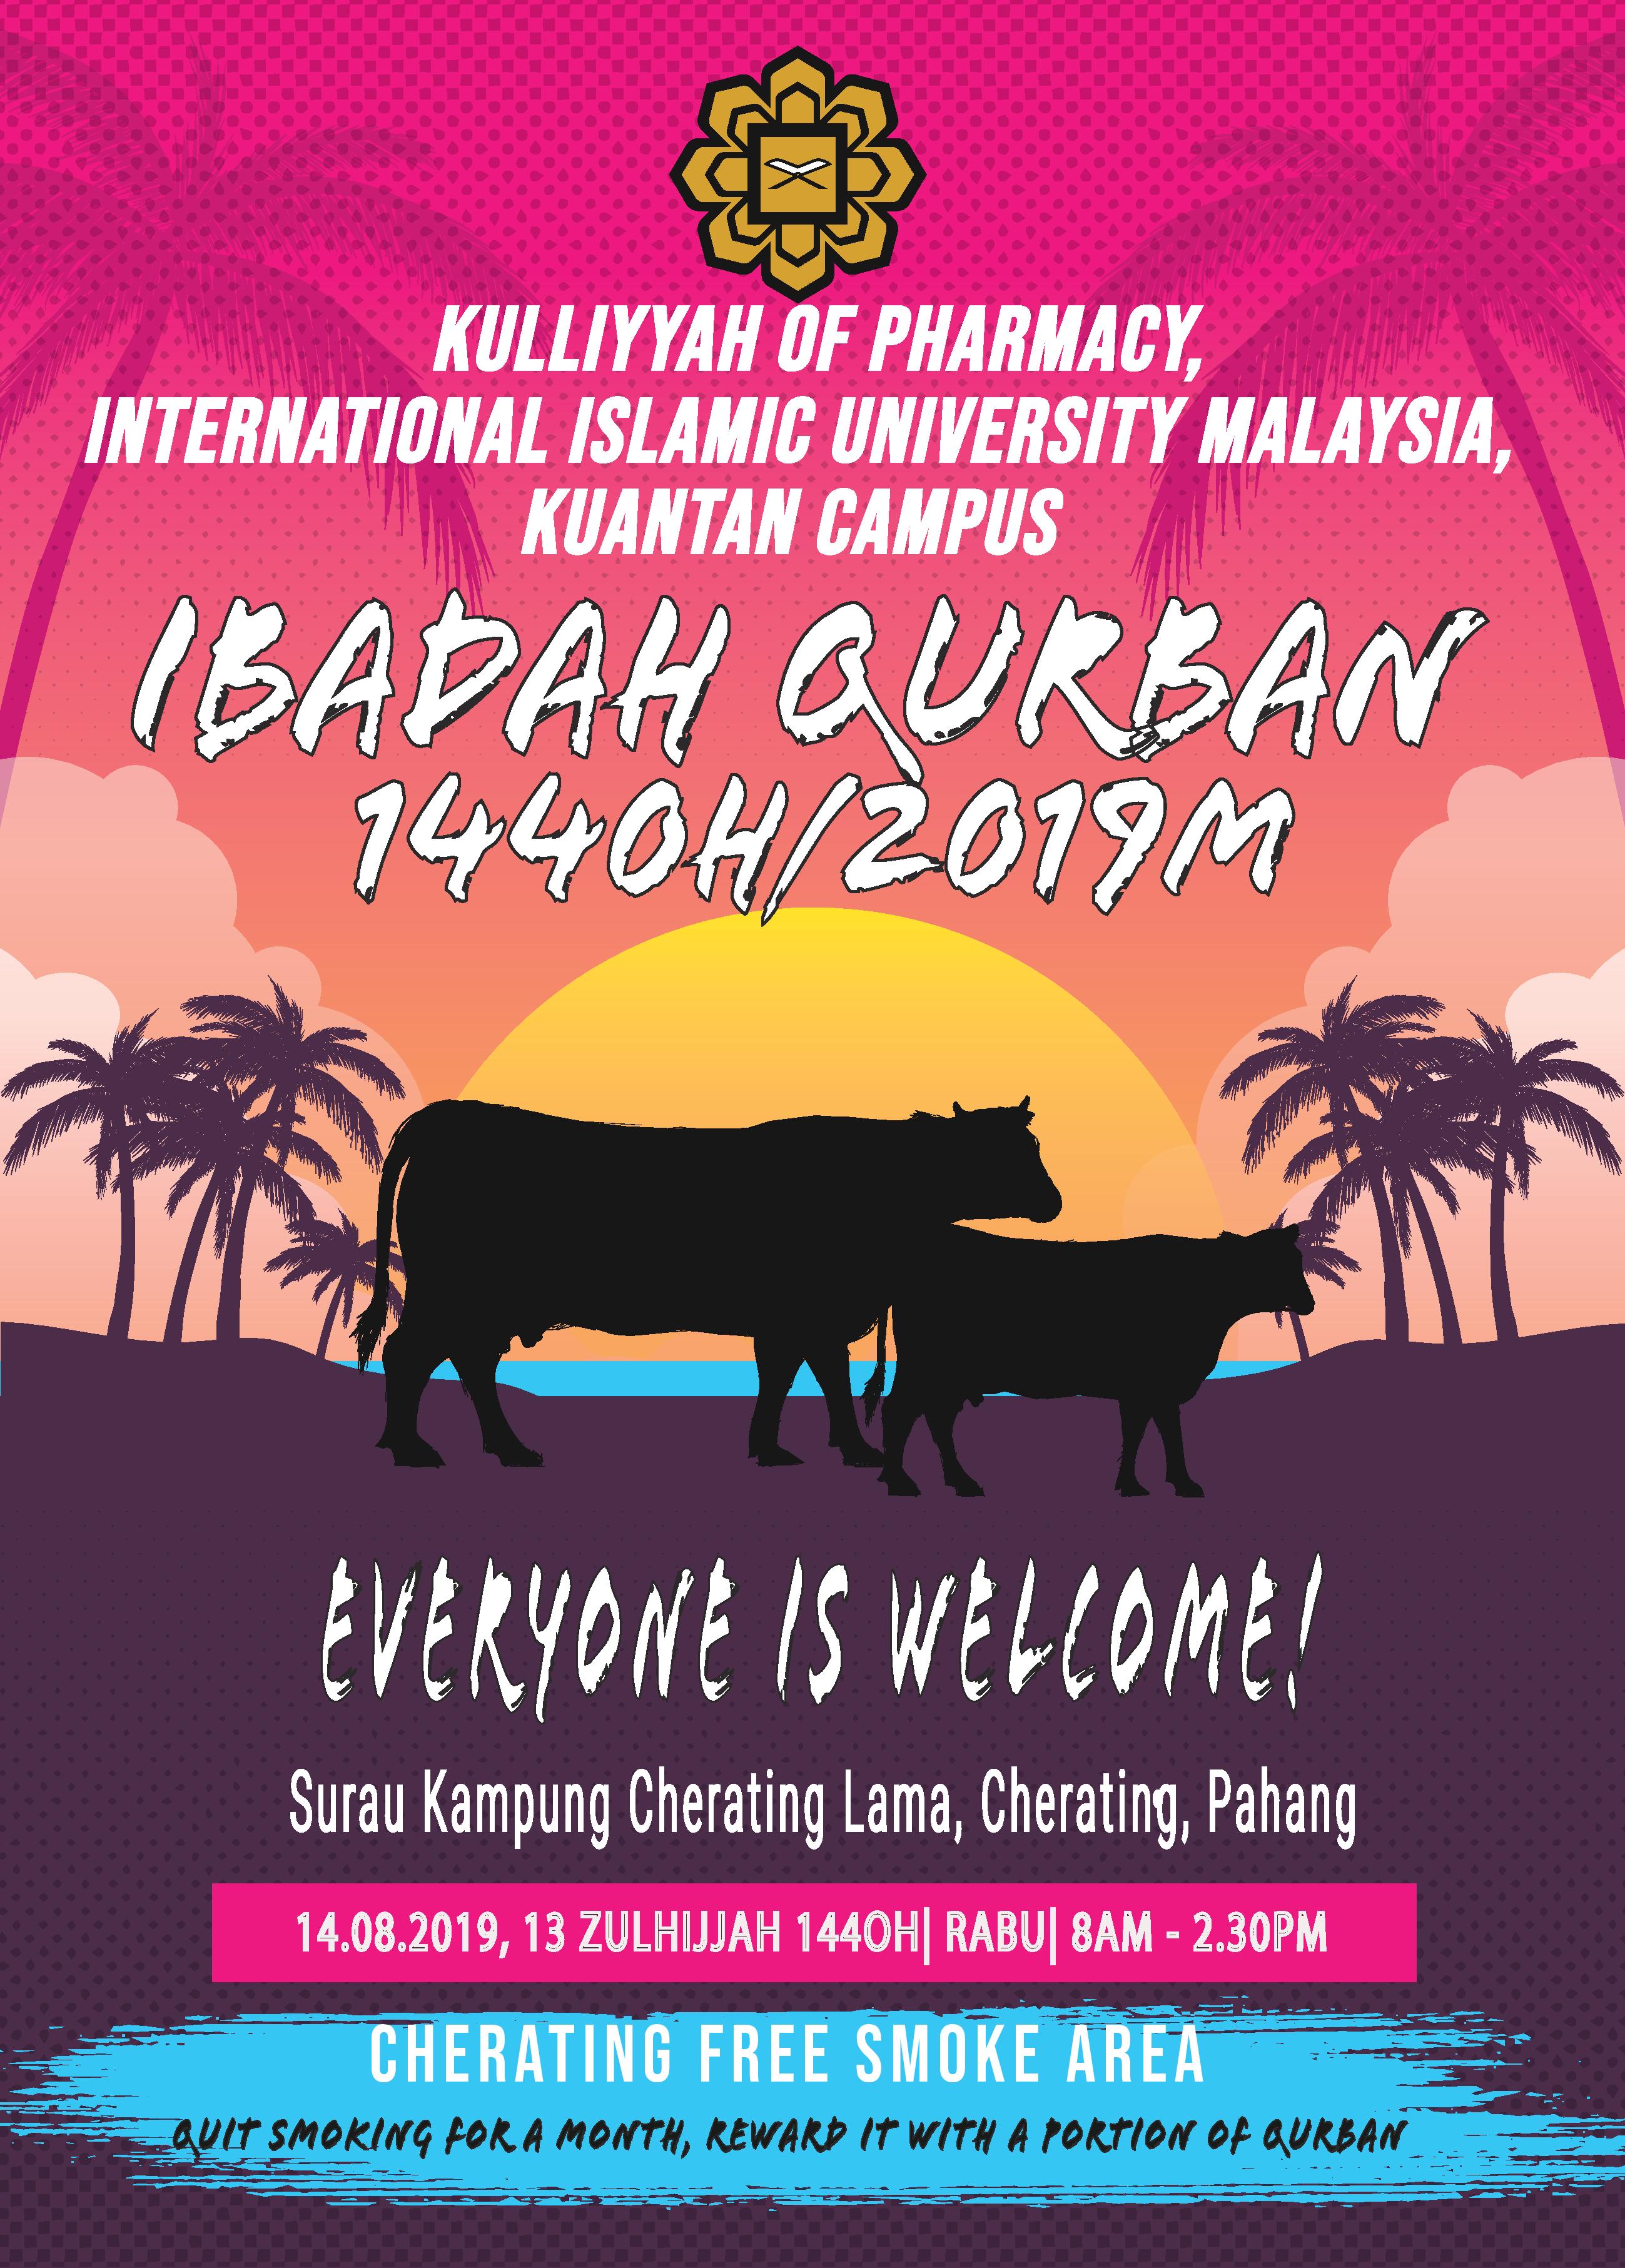 IBADAH QURBAN PROGRAMME 1440H/2019 IN CONJUNCTION WITH THE KULLIYYAH FLAGSHIP “SUSTAINABLE SMOKE-FREE CAMPUS”   